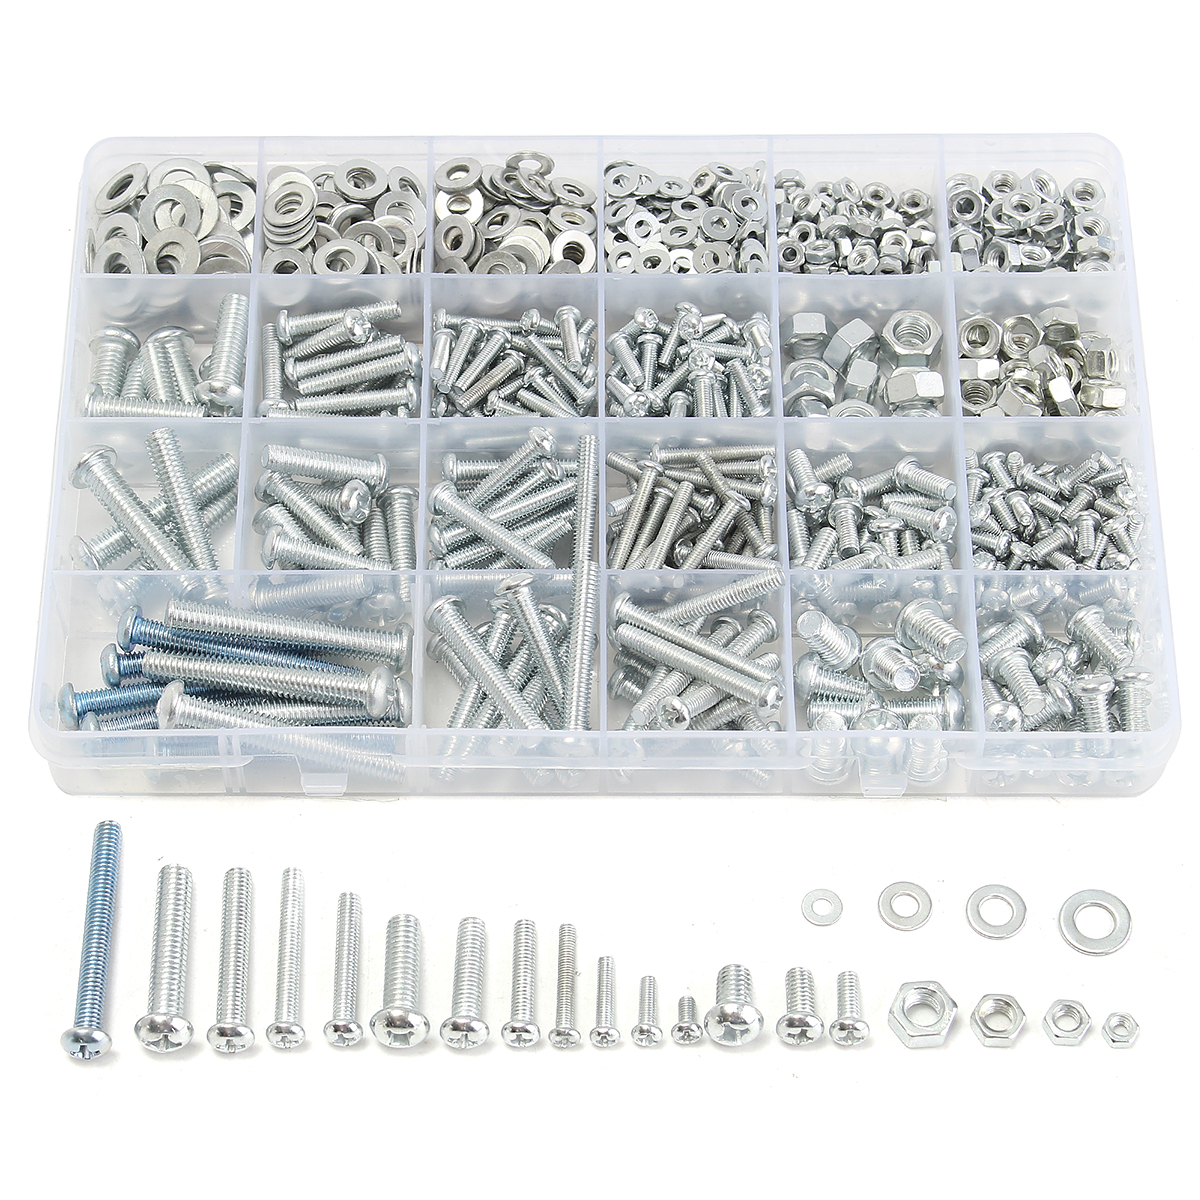 

Suleve™ MXSP2 M3 M4 M5 M6 Stainless Steel Phillips Round Head Screw Nuts Flat Washers Assortment Kit 900g